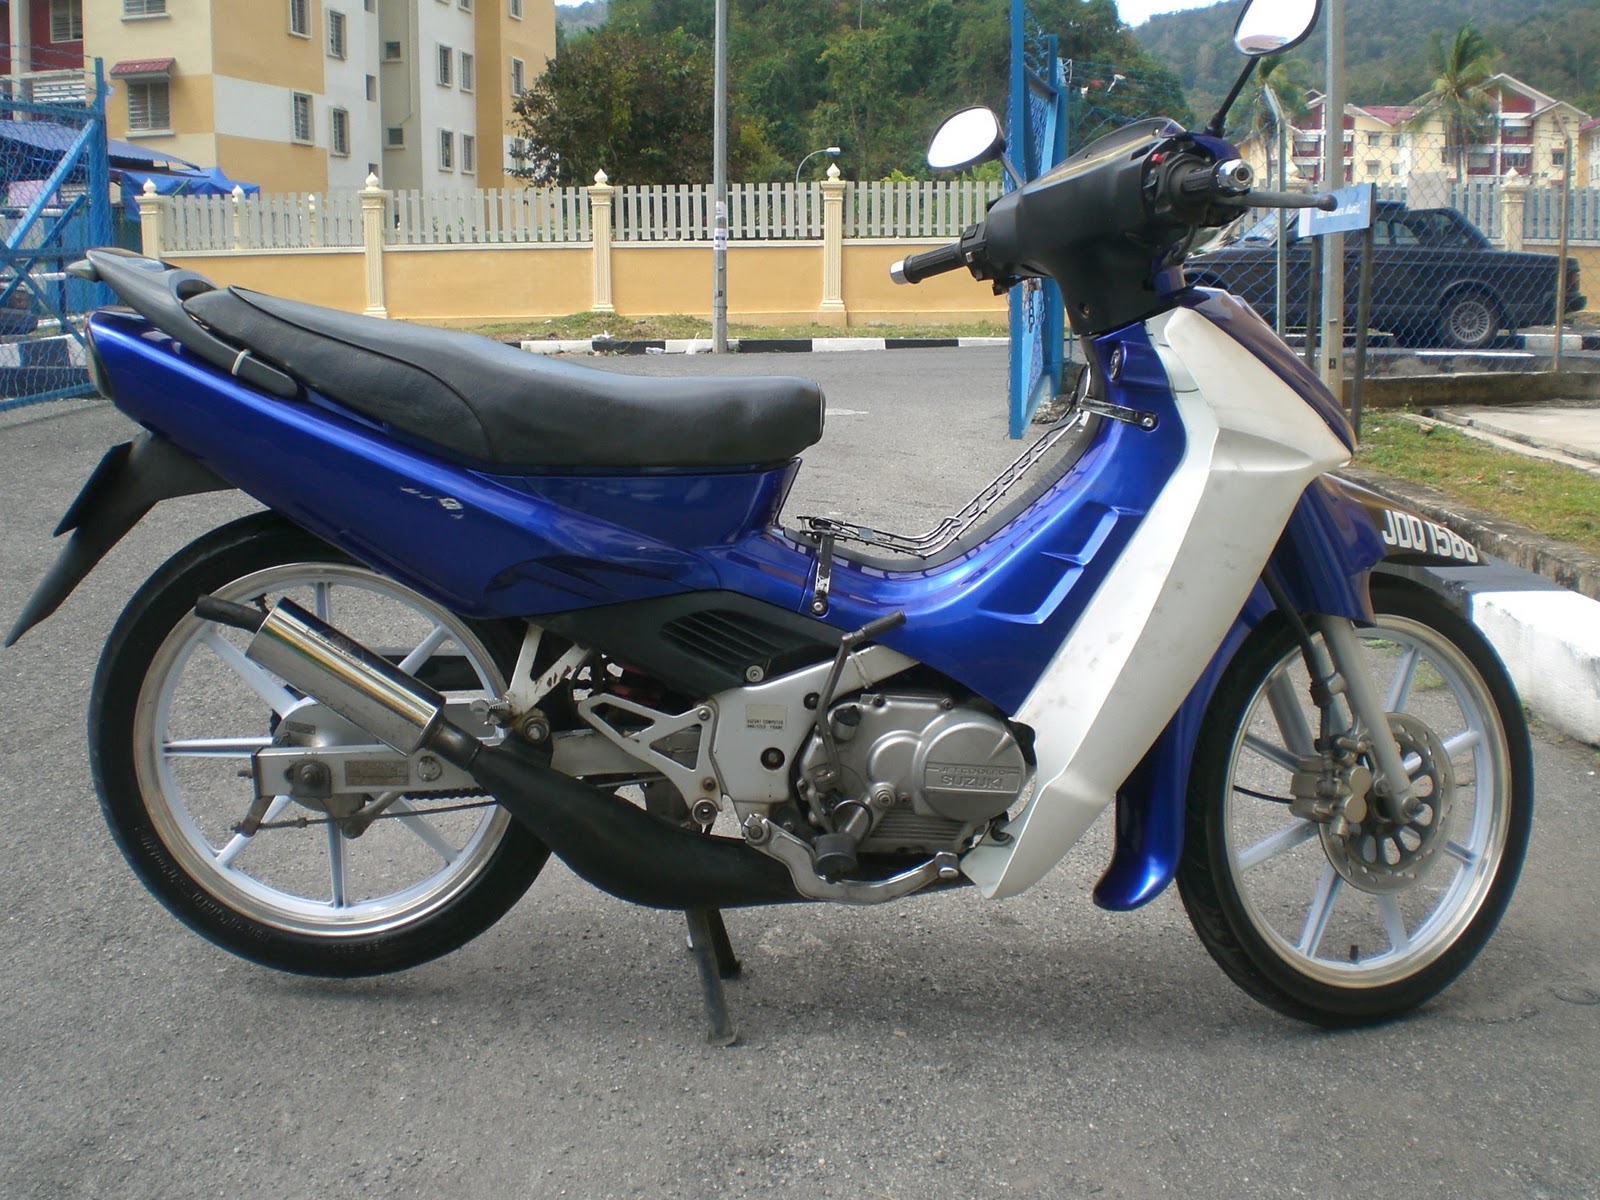 Second-Hand Motorcycles for Sale" Suzuki RG 110 Sports